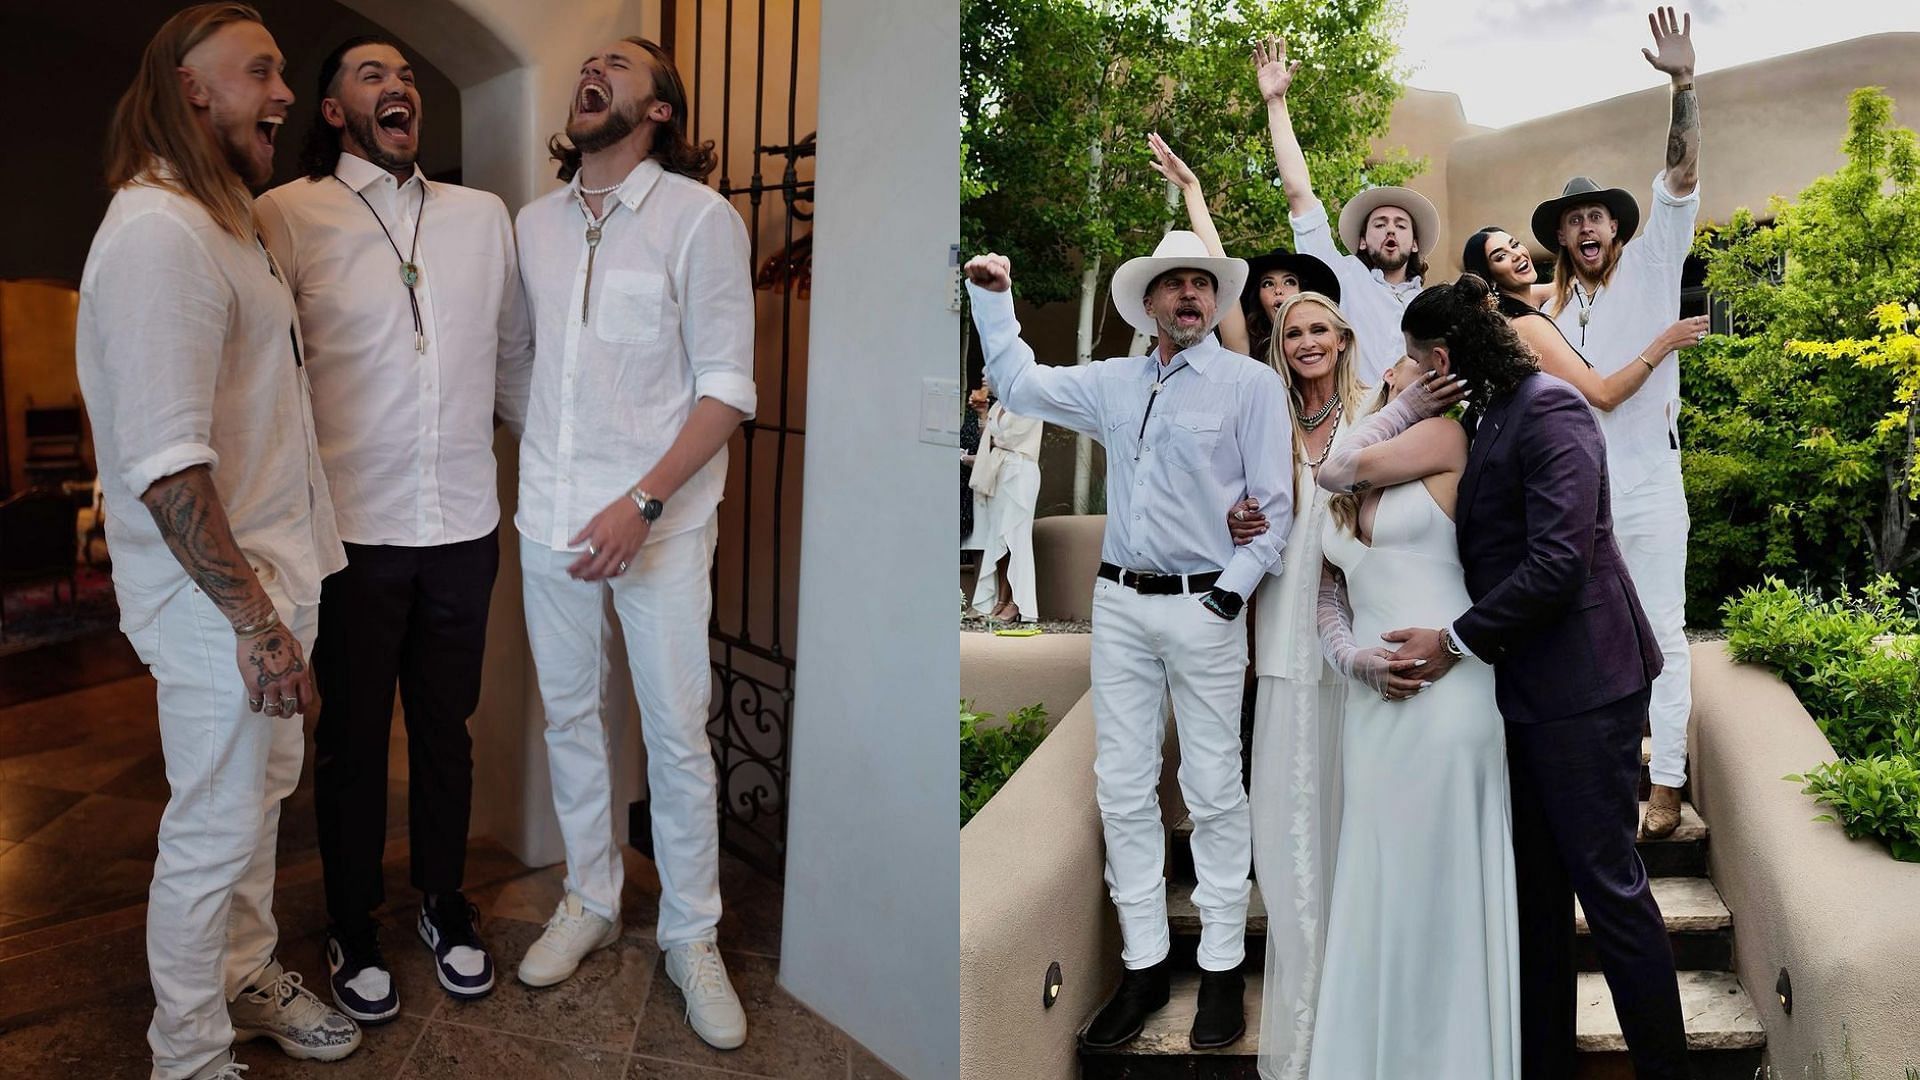 Photos from Emma Kittle and Cody Ponce&#039;s wedding (Image credit: gkittle/Instagram)